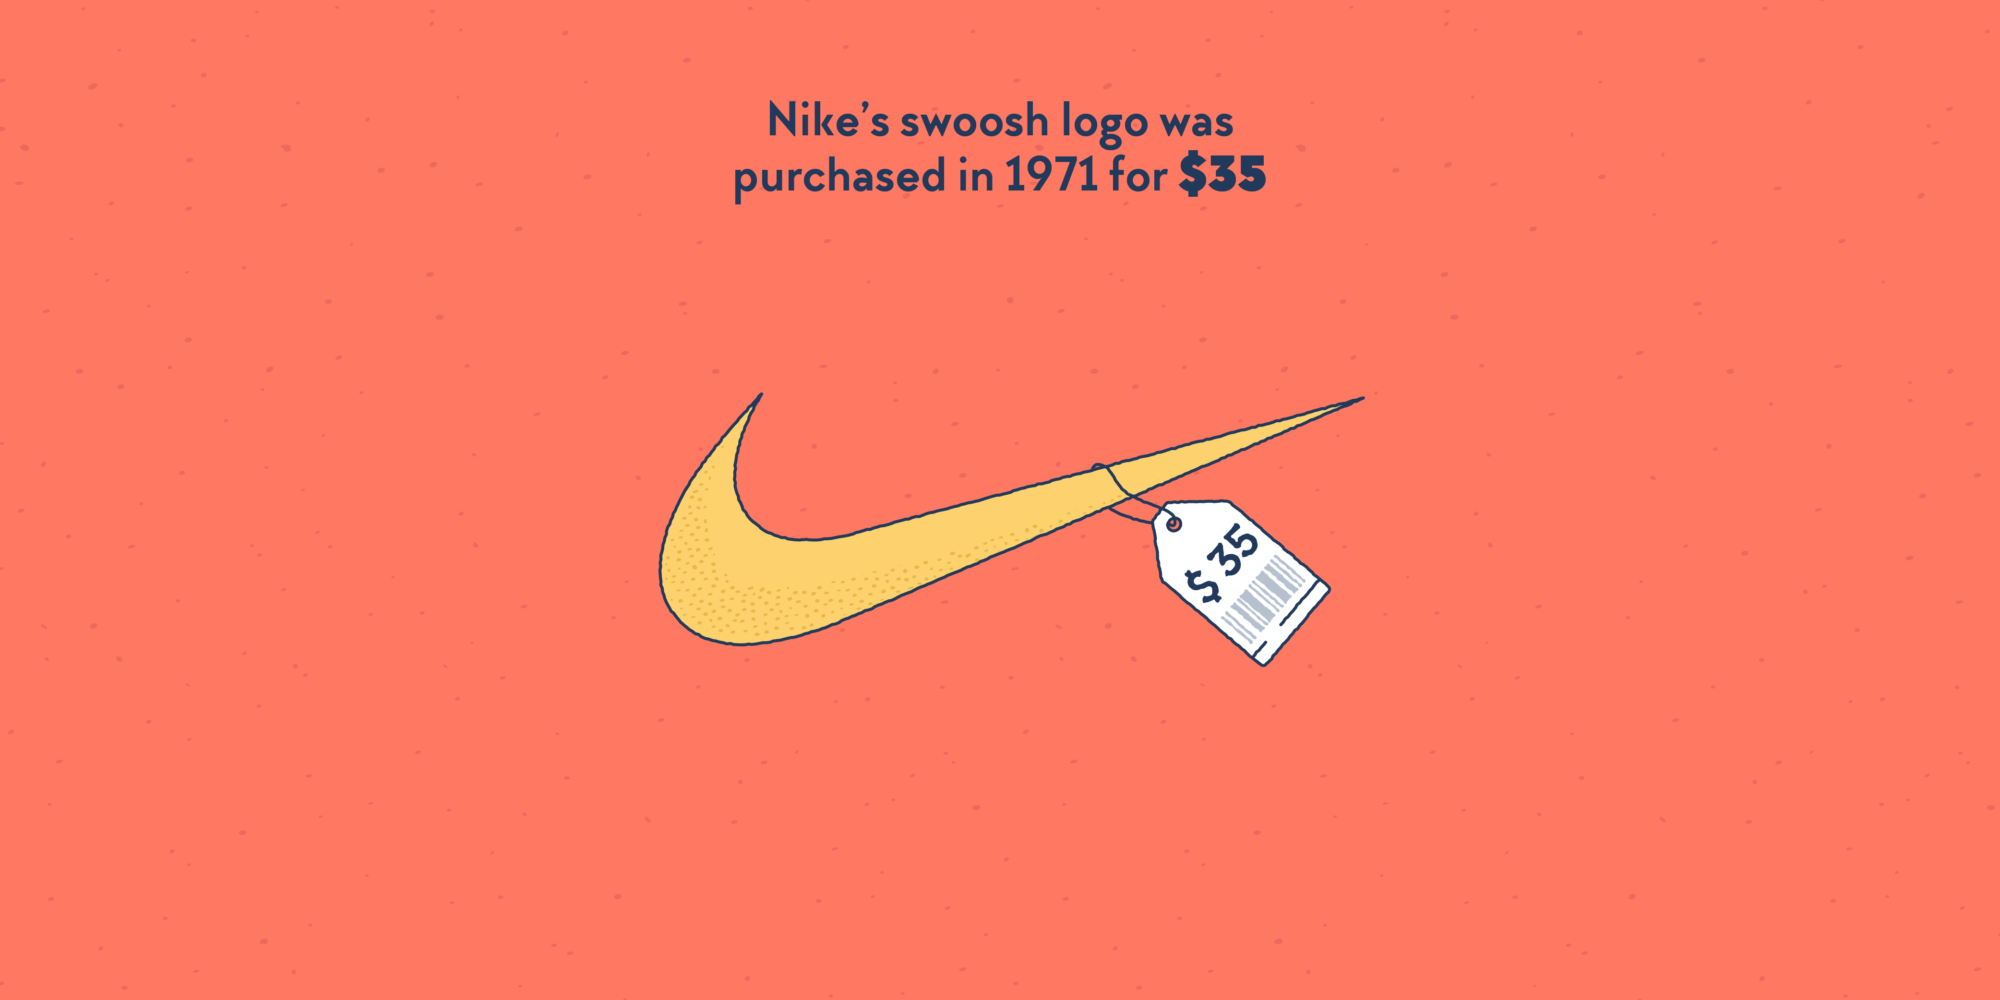 The swoosh from the Nike logo, with a $35 price tag hanging on it.